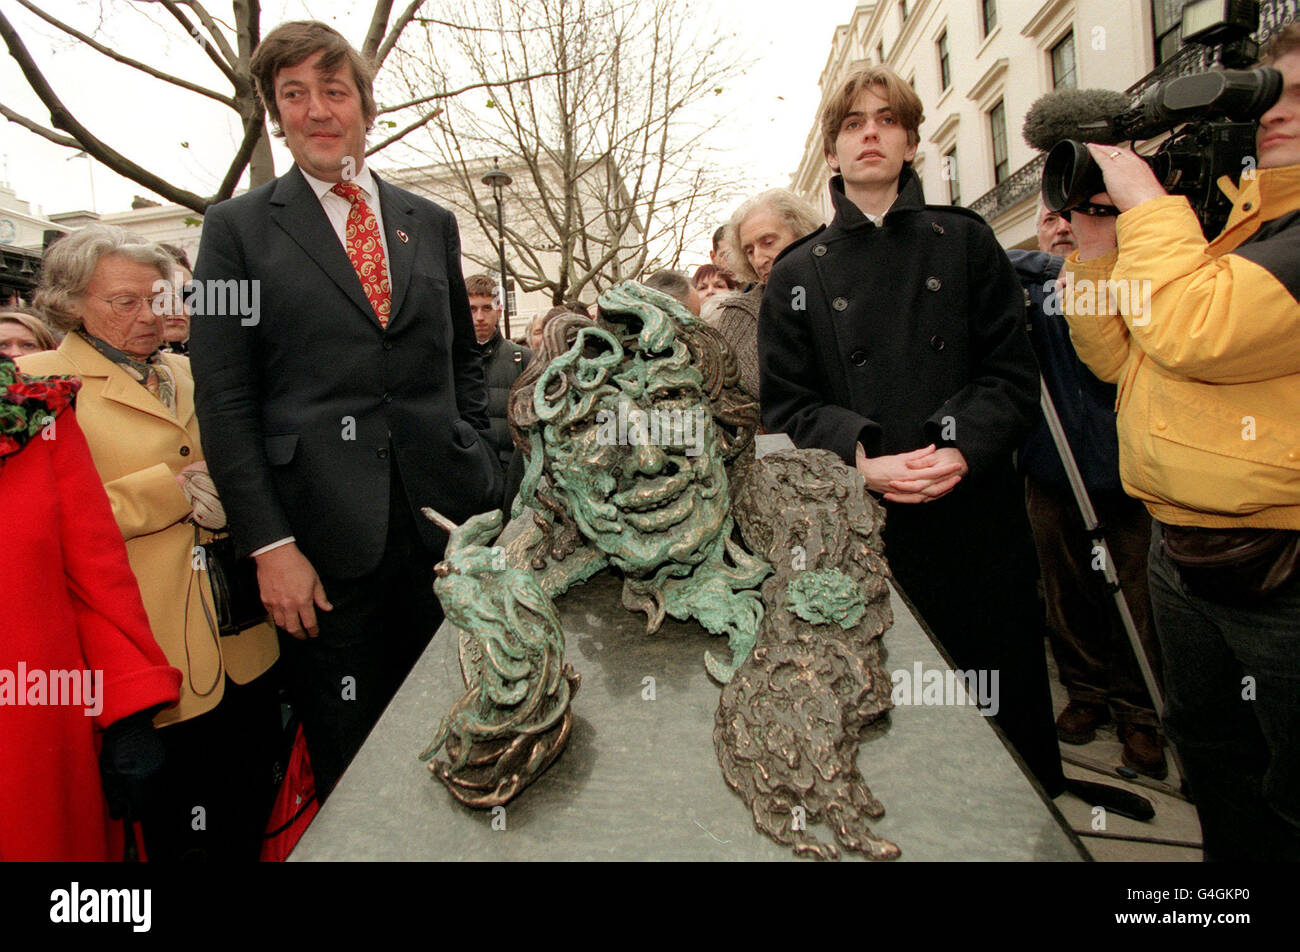 Actor Stephen Fry (left) and Oscar Wilde's great-grandson Lucian Holland with a statue of the Irish writer by Maggi Hambling which he unveiled near London's Trafalgar Square today (Monday). The statue is part of a memorial entitled 'A Conversation with Oscar Wilde' which depicts Wilde in bronze rising from his granite sarcophagus. Fry played the Irish playwright in a recent film. Picture by Peter Jordan. /PJ. 7/12/98 Stock Photo